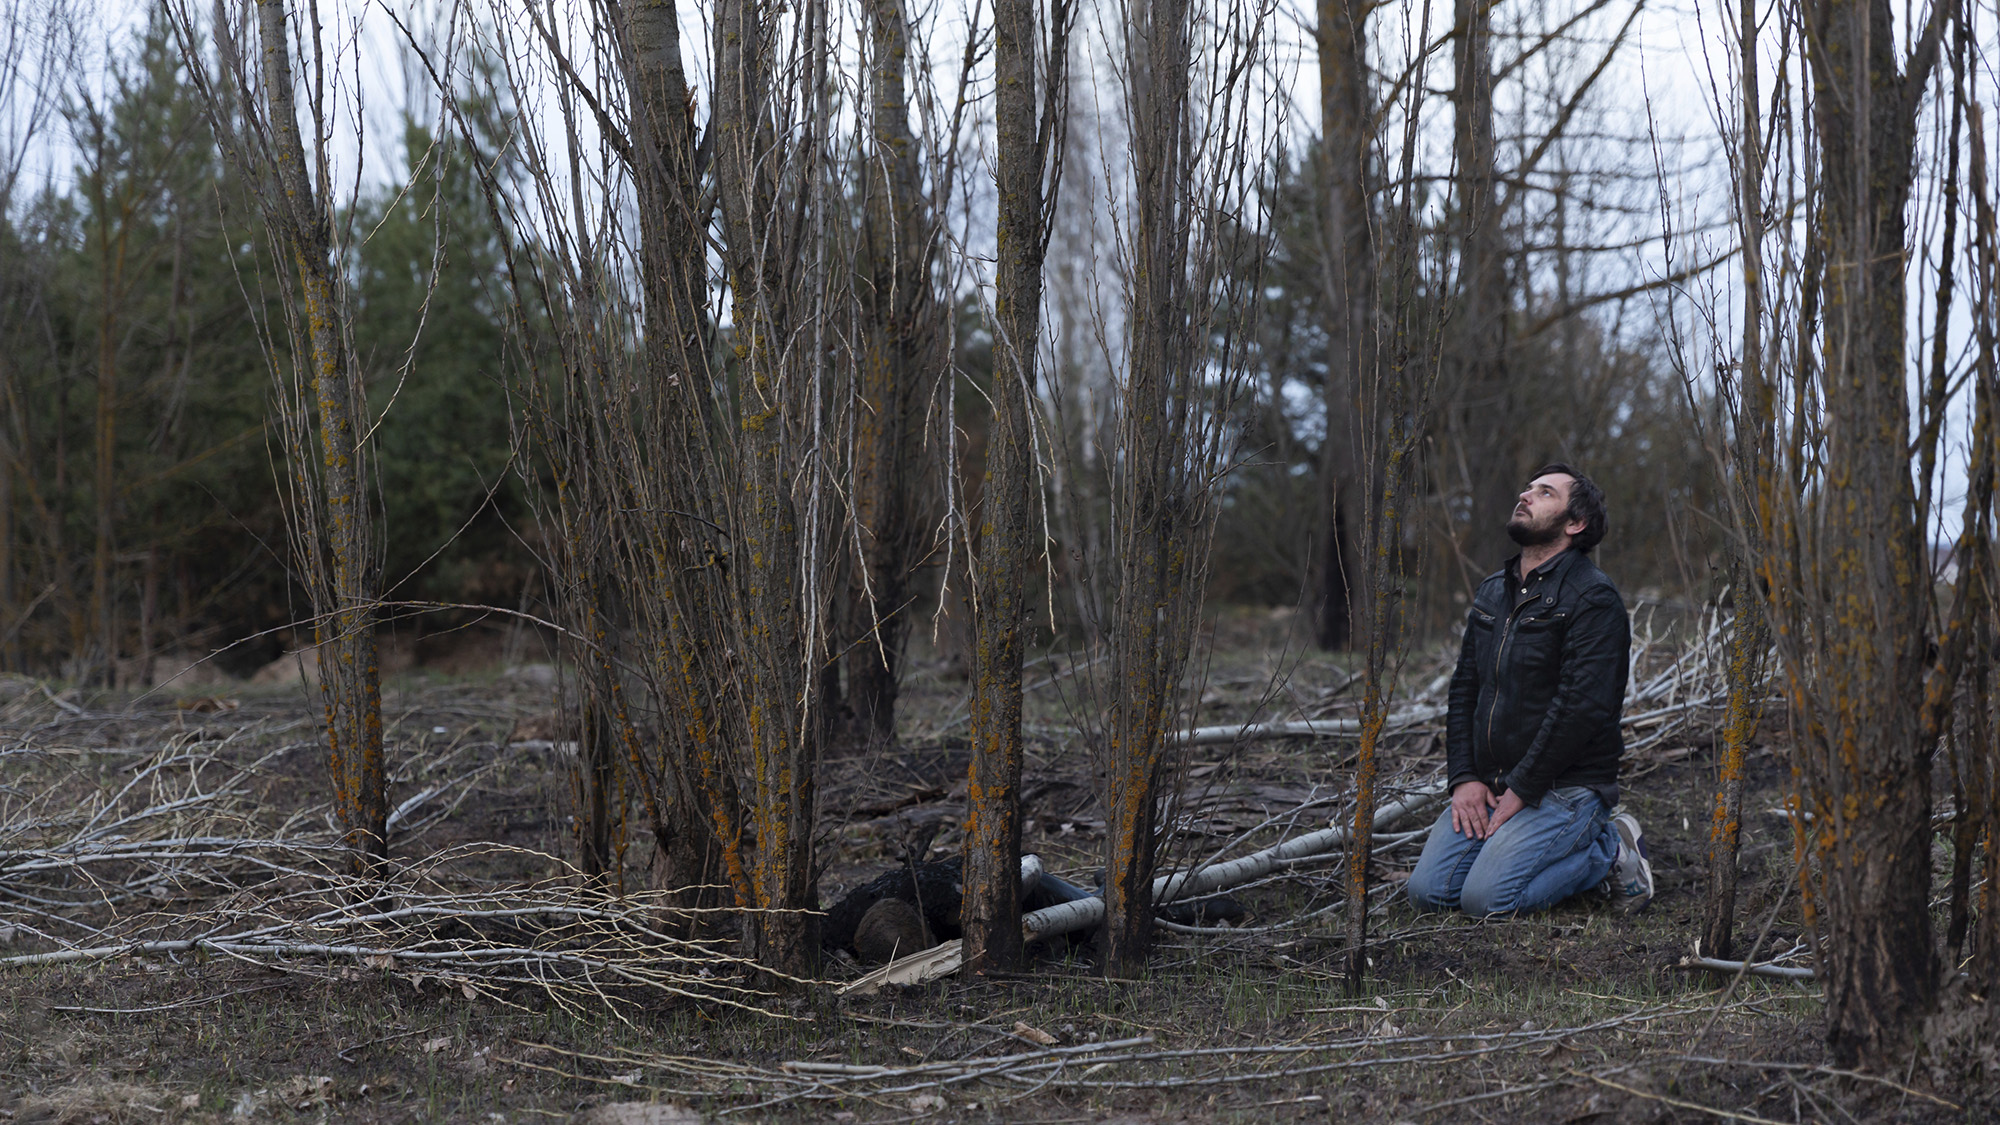 A Ukrainian man named Maxim prays next to a body of a male left at an abandoned Russian camp near Makariv, Ukraine on April 7.